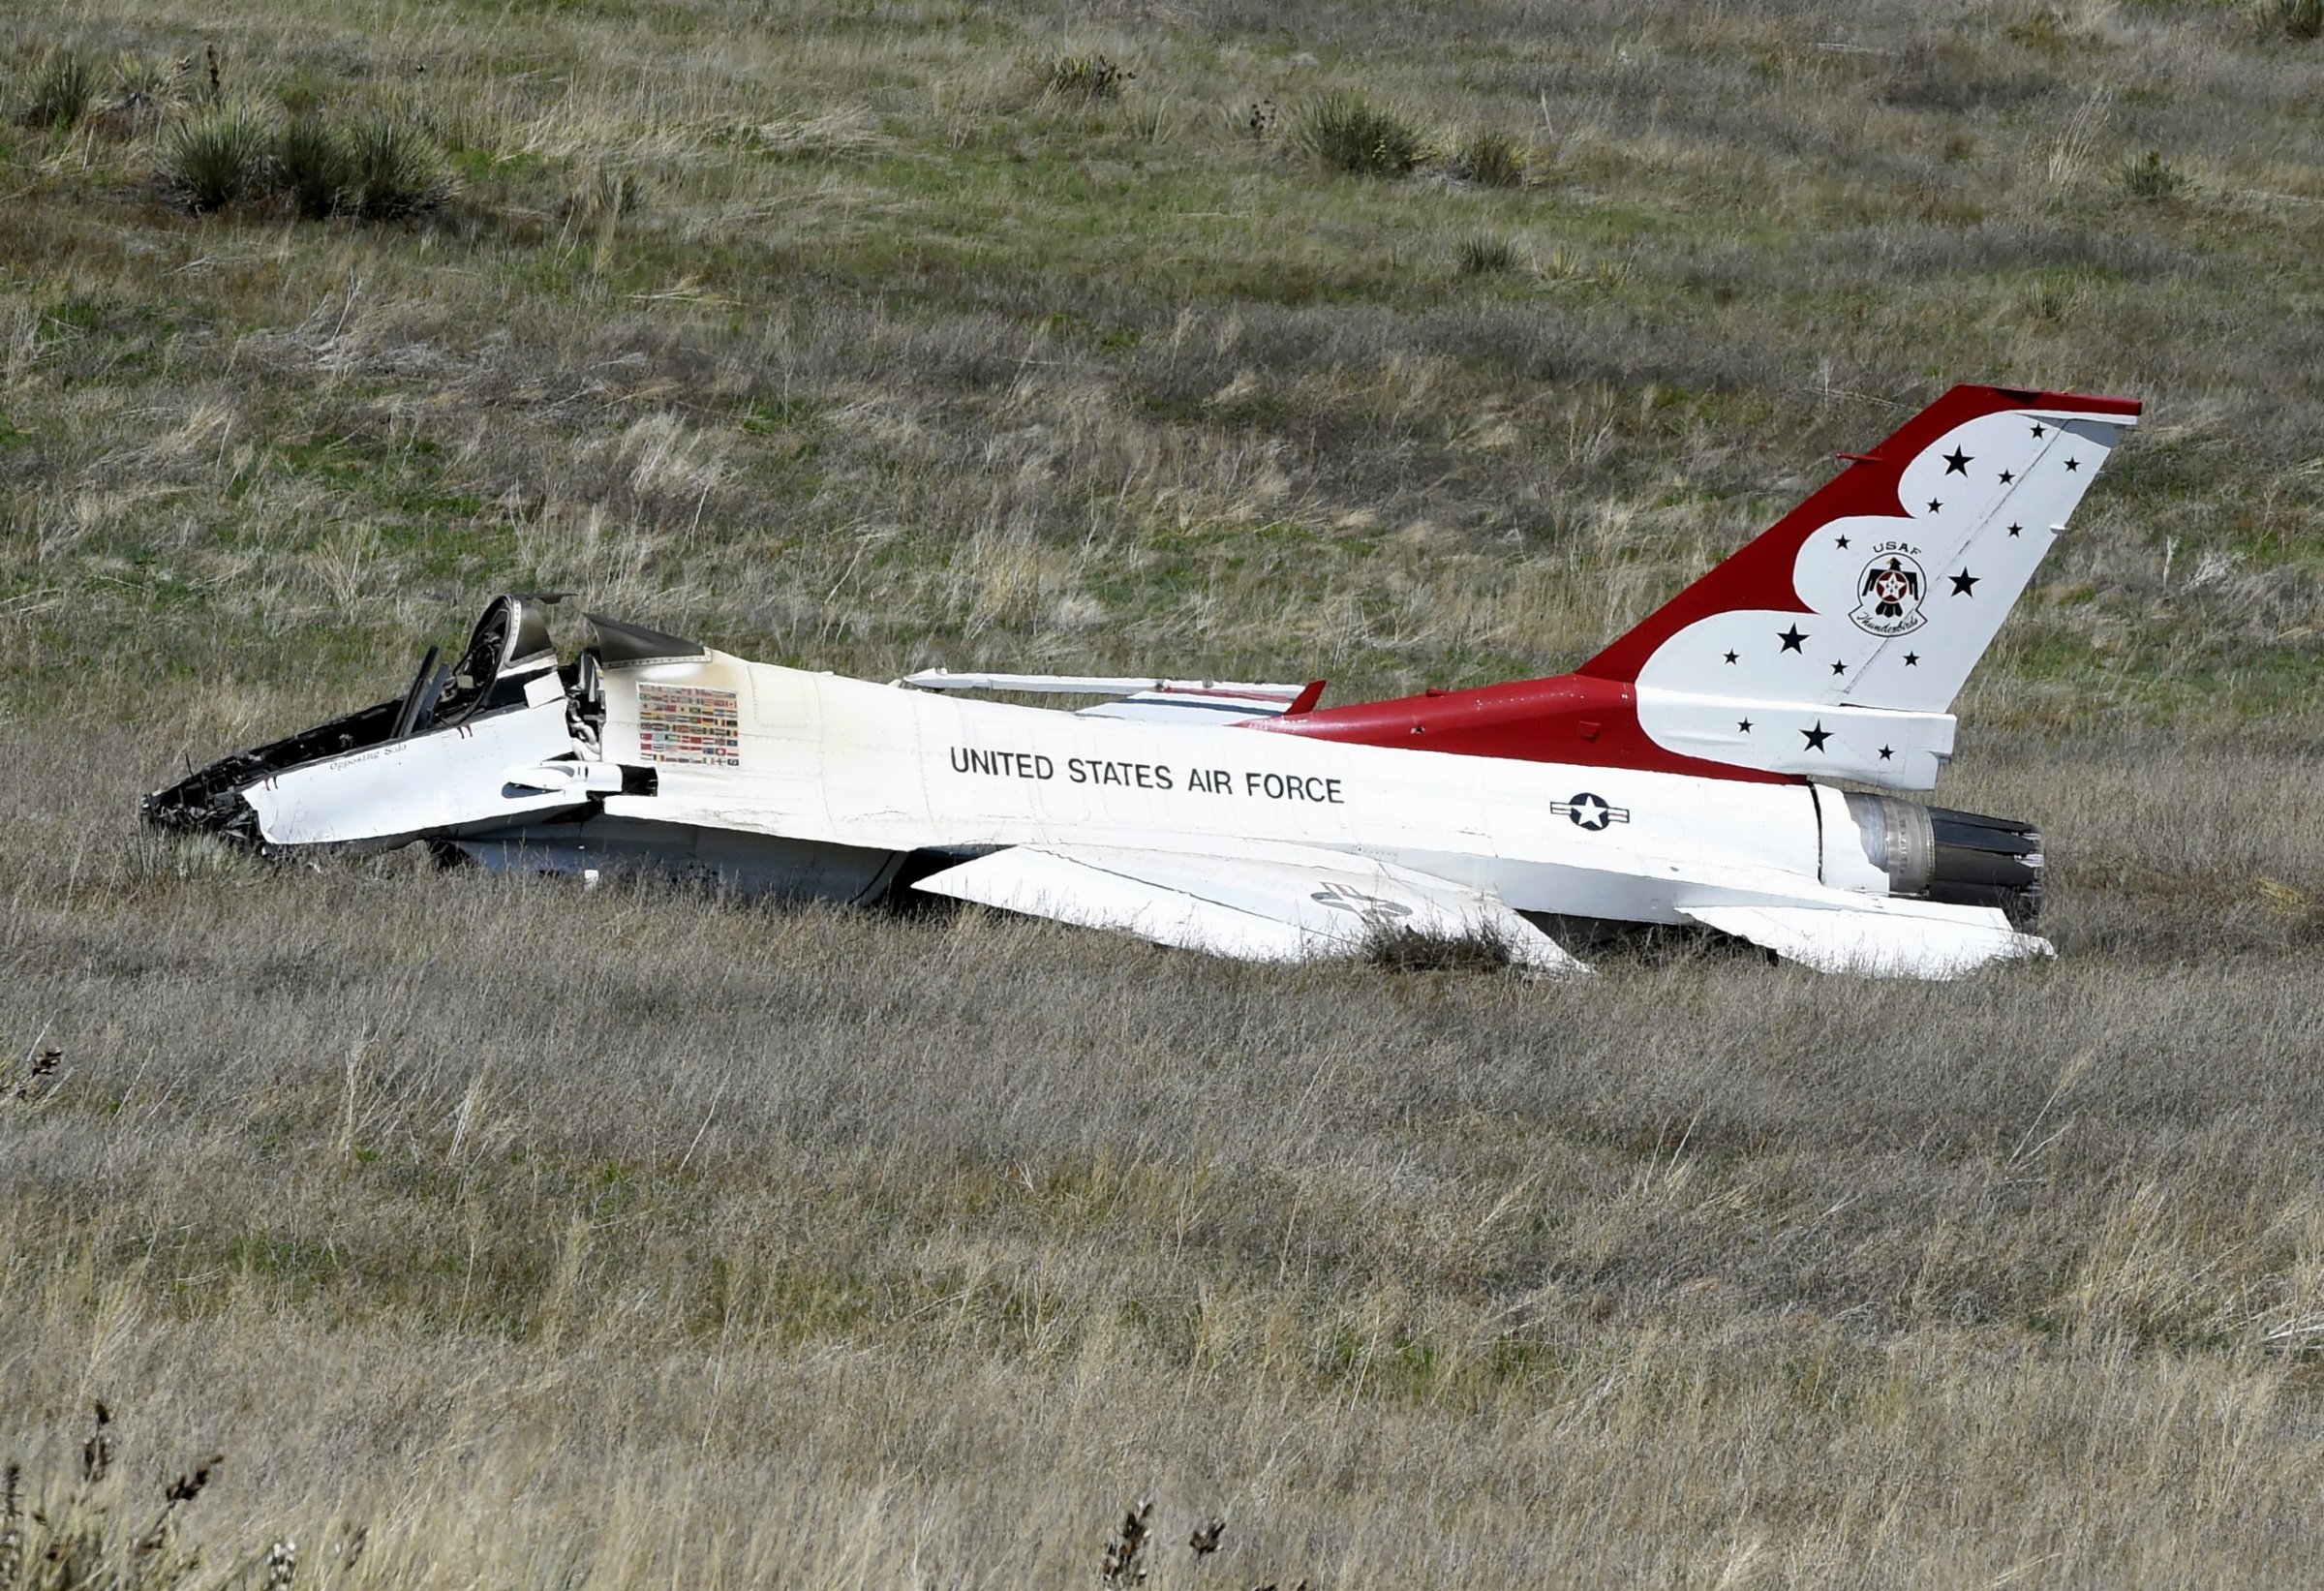 A U.S. Air Force Thunderbird that crashed following a flyover rests on the ground south of the Colorado Springs, Colo., airport after a performance at a commencement for Air Force Academy cadets Thursday, June 2, 2016. The pilot ejected safely from the jet. (Jerilee Bennett/The Gazette via AP) MAGS OUT; MANDATORY CREDIT